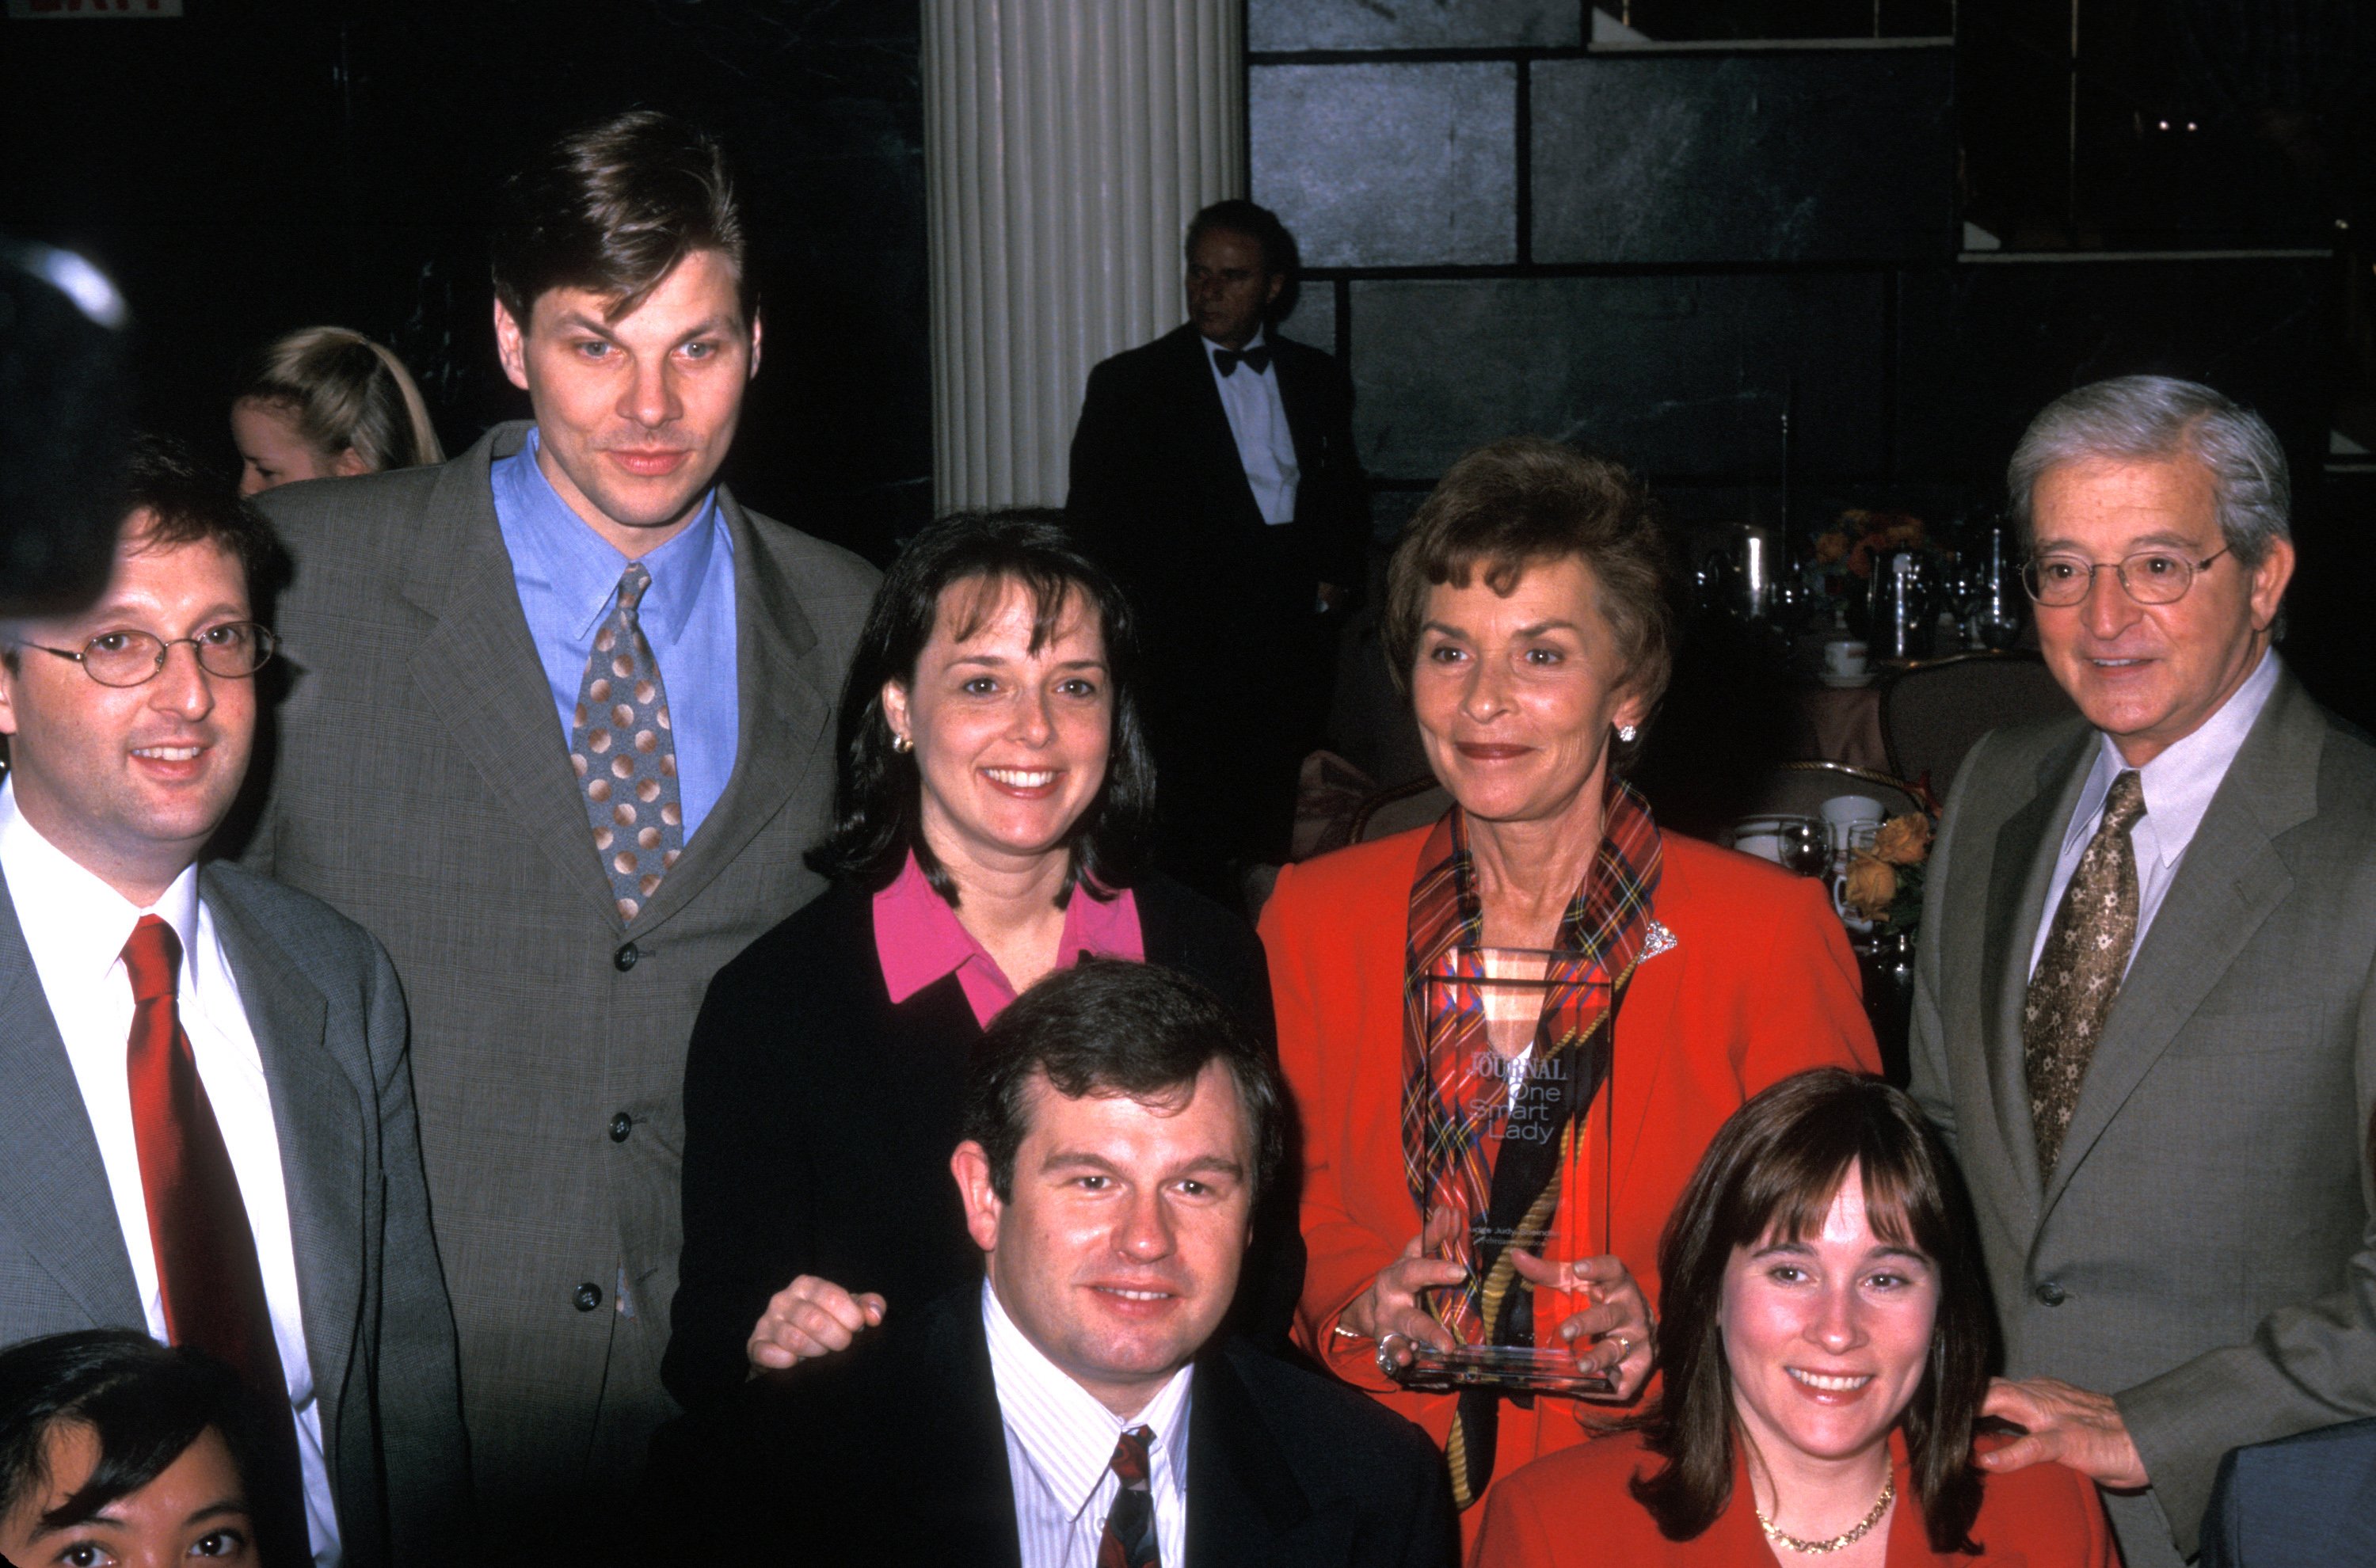 Judy Sheindlin, Jerry Sheindlin, and family on February 23, 2000 at the Waldorf Astoria Hotel in New York City. | Source: Getty Images